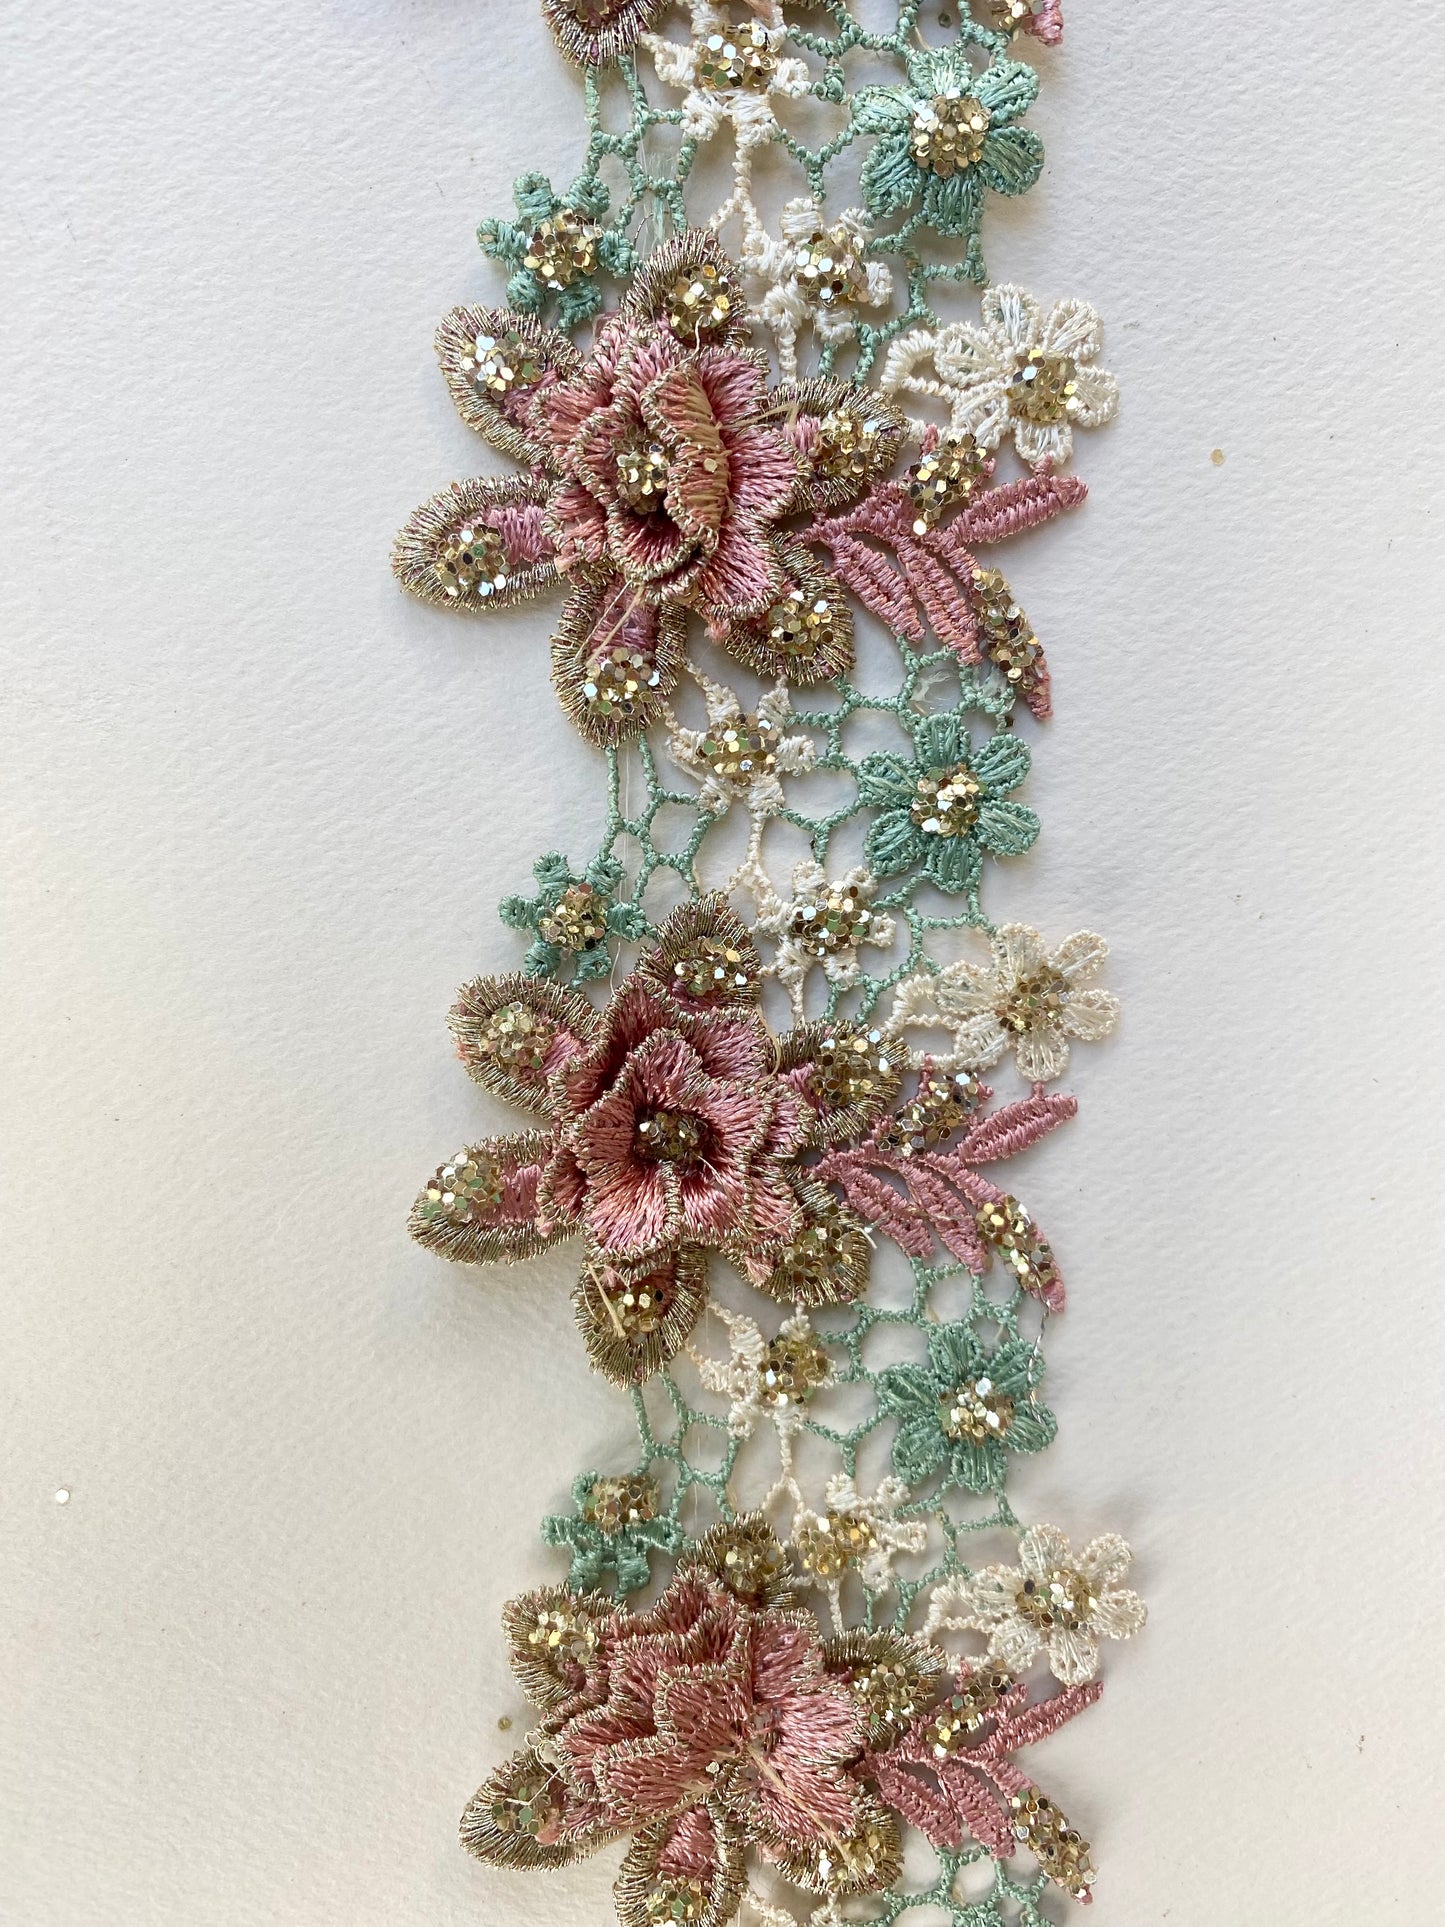 Rose and Daisy lace. Dusty Pink, Aqua and Gold Thread